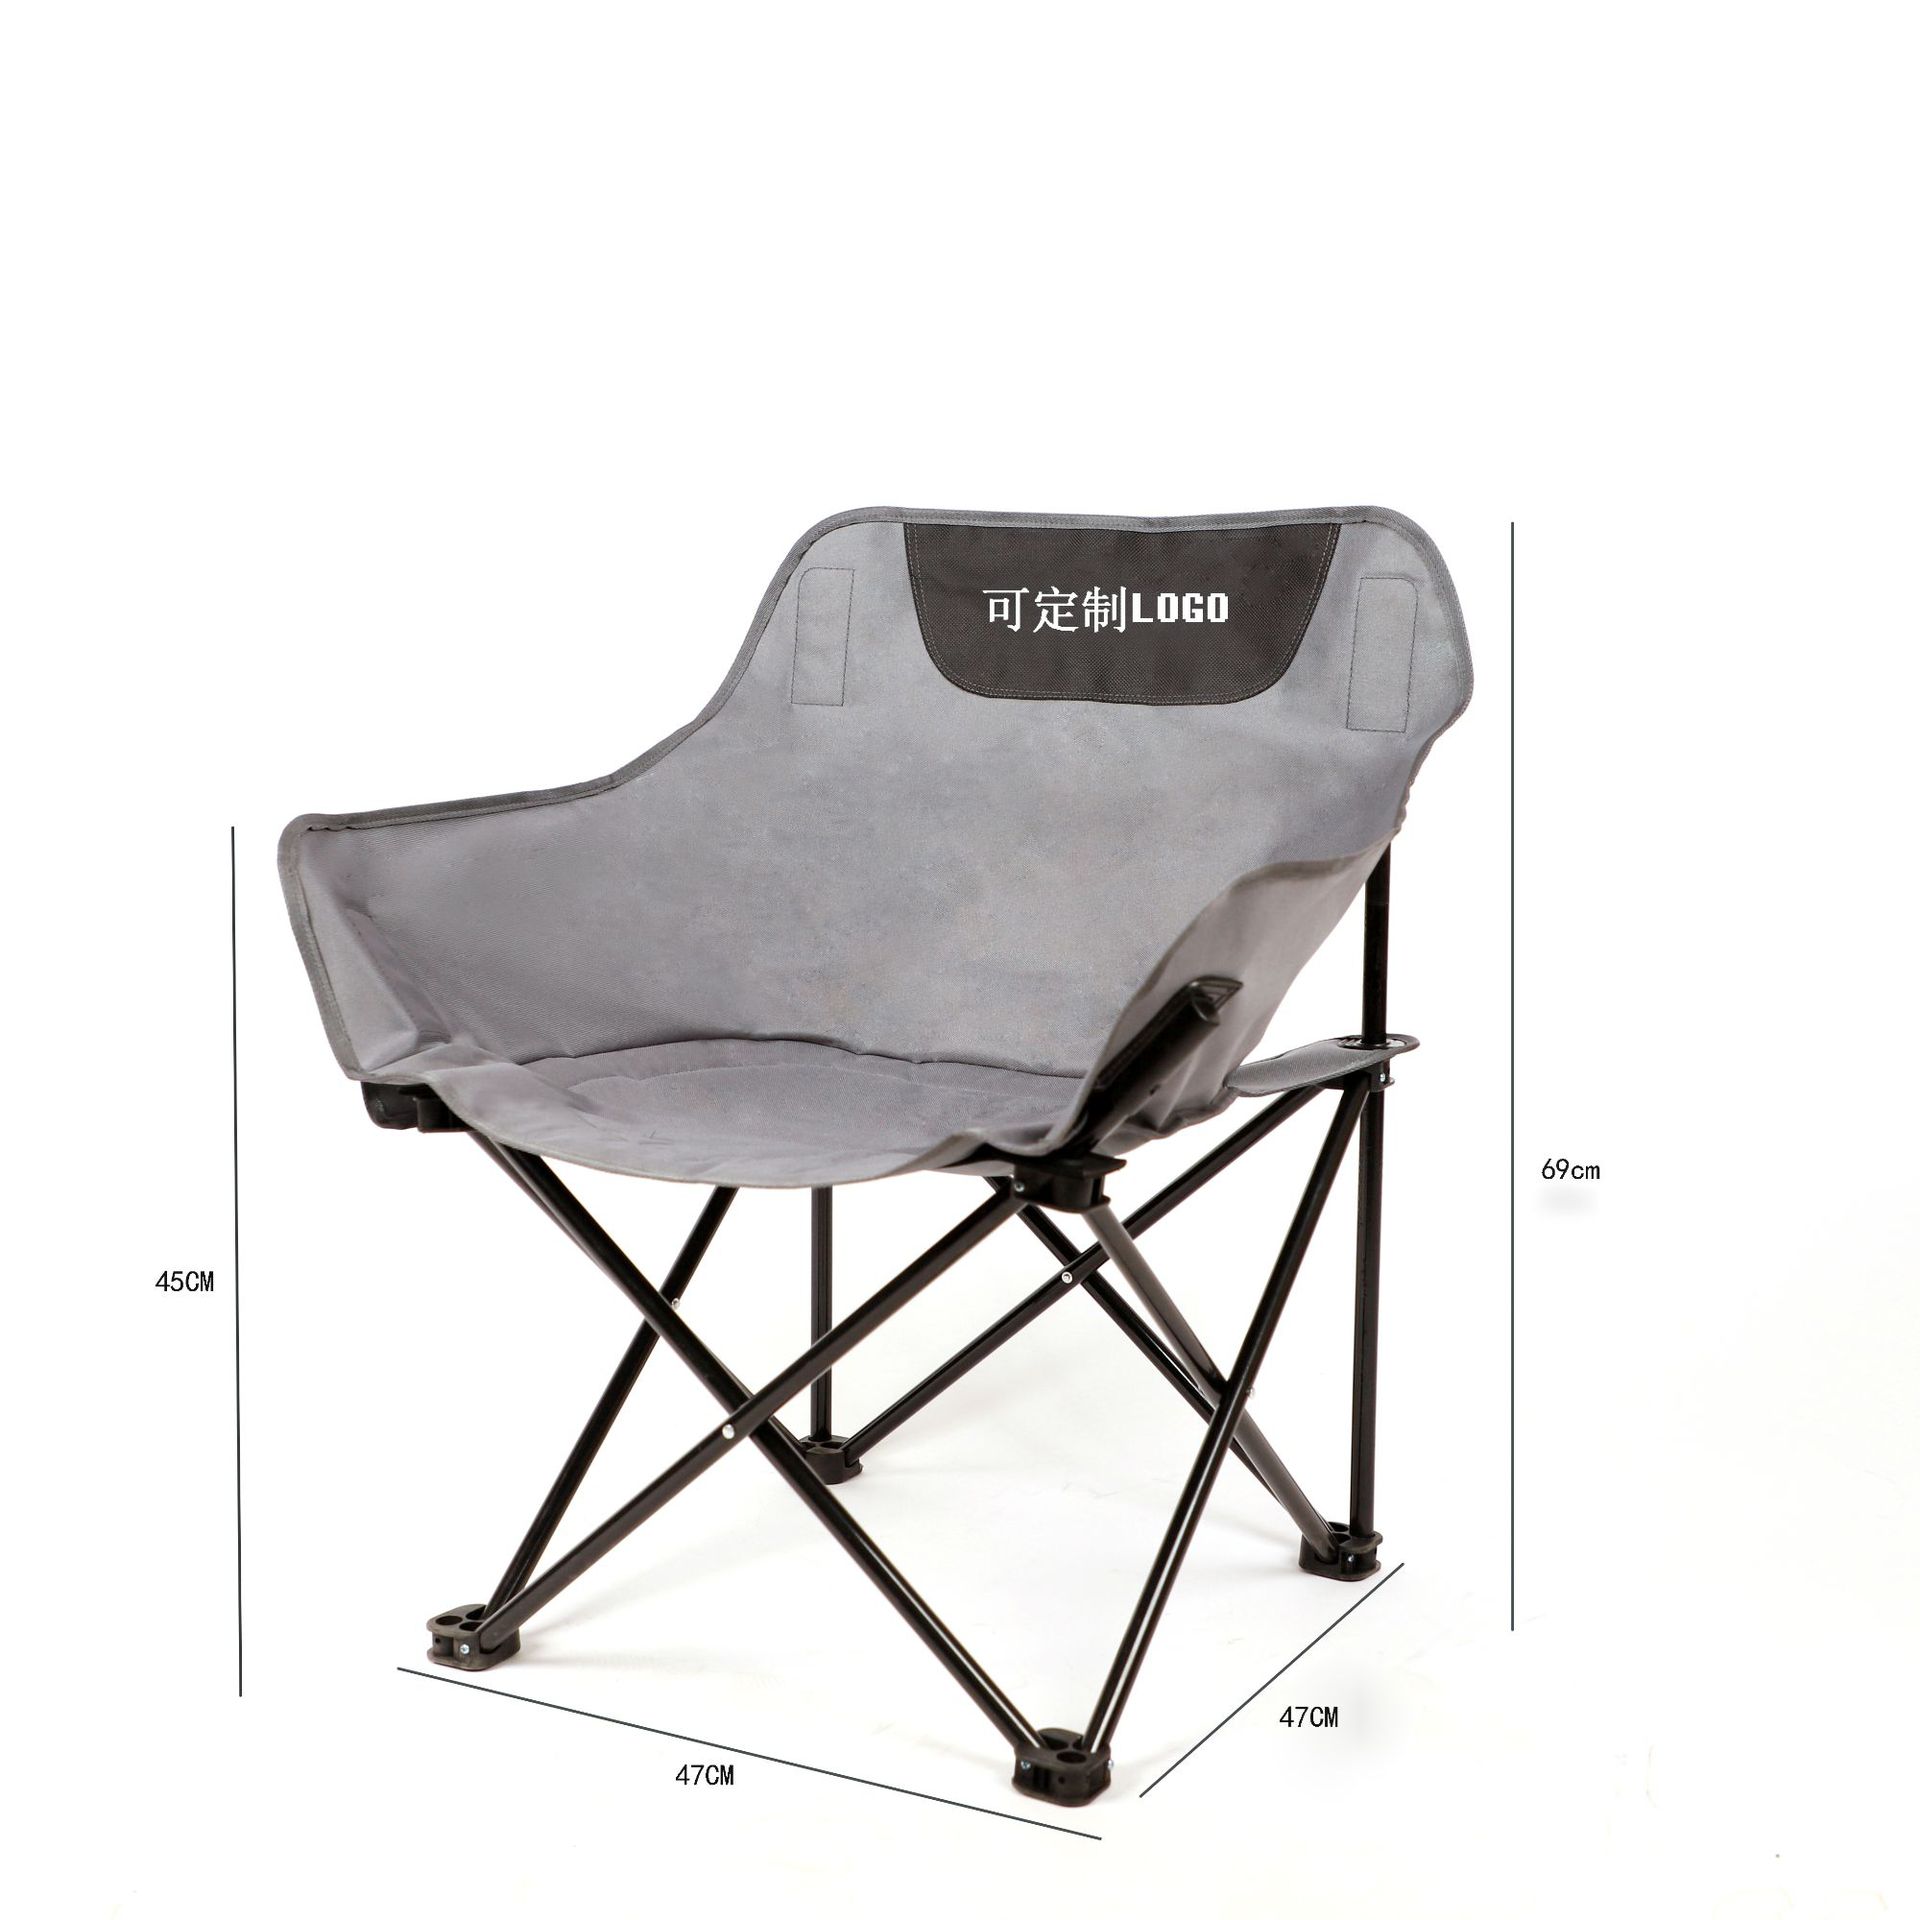 Outdoor Folding Moon Chair Portable Ultralight Camping Beach Chair Fishing Stool Leisure Backrest Picnic Recliner